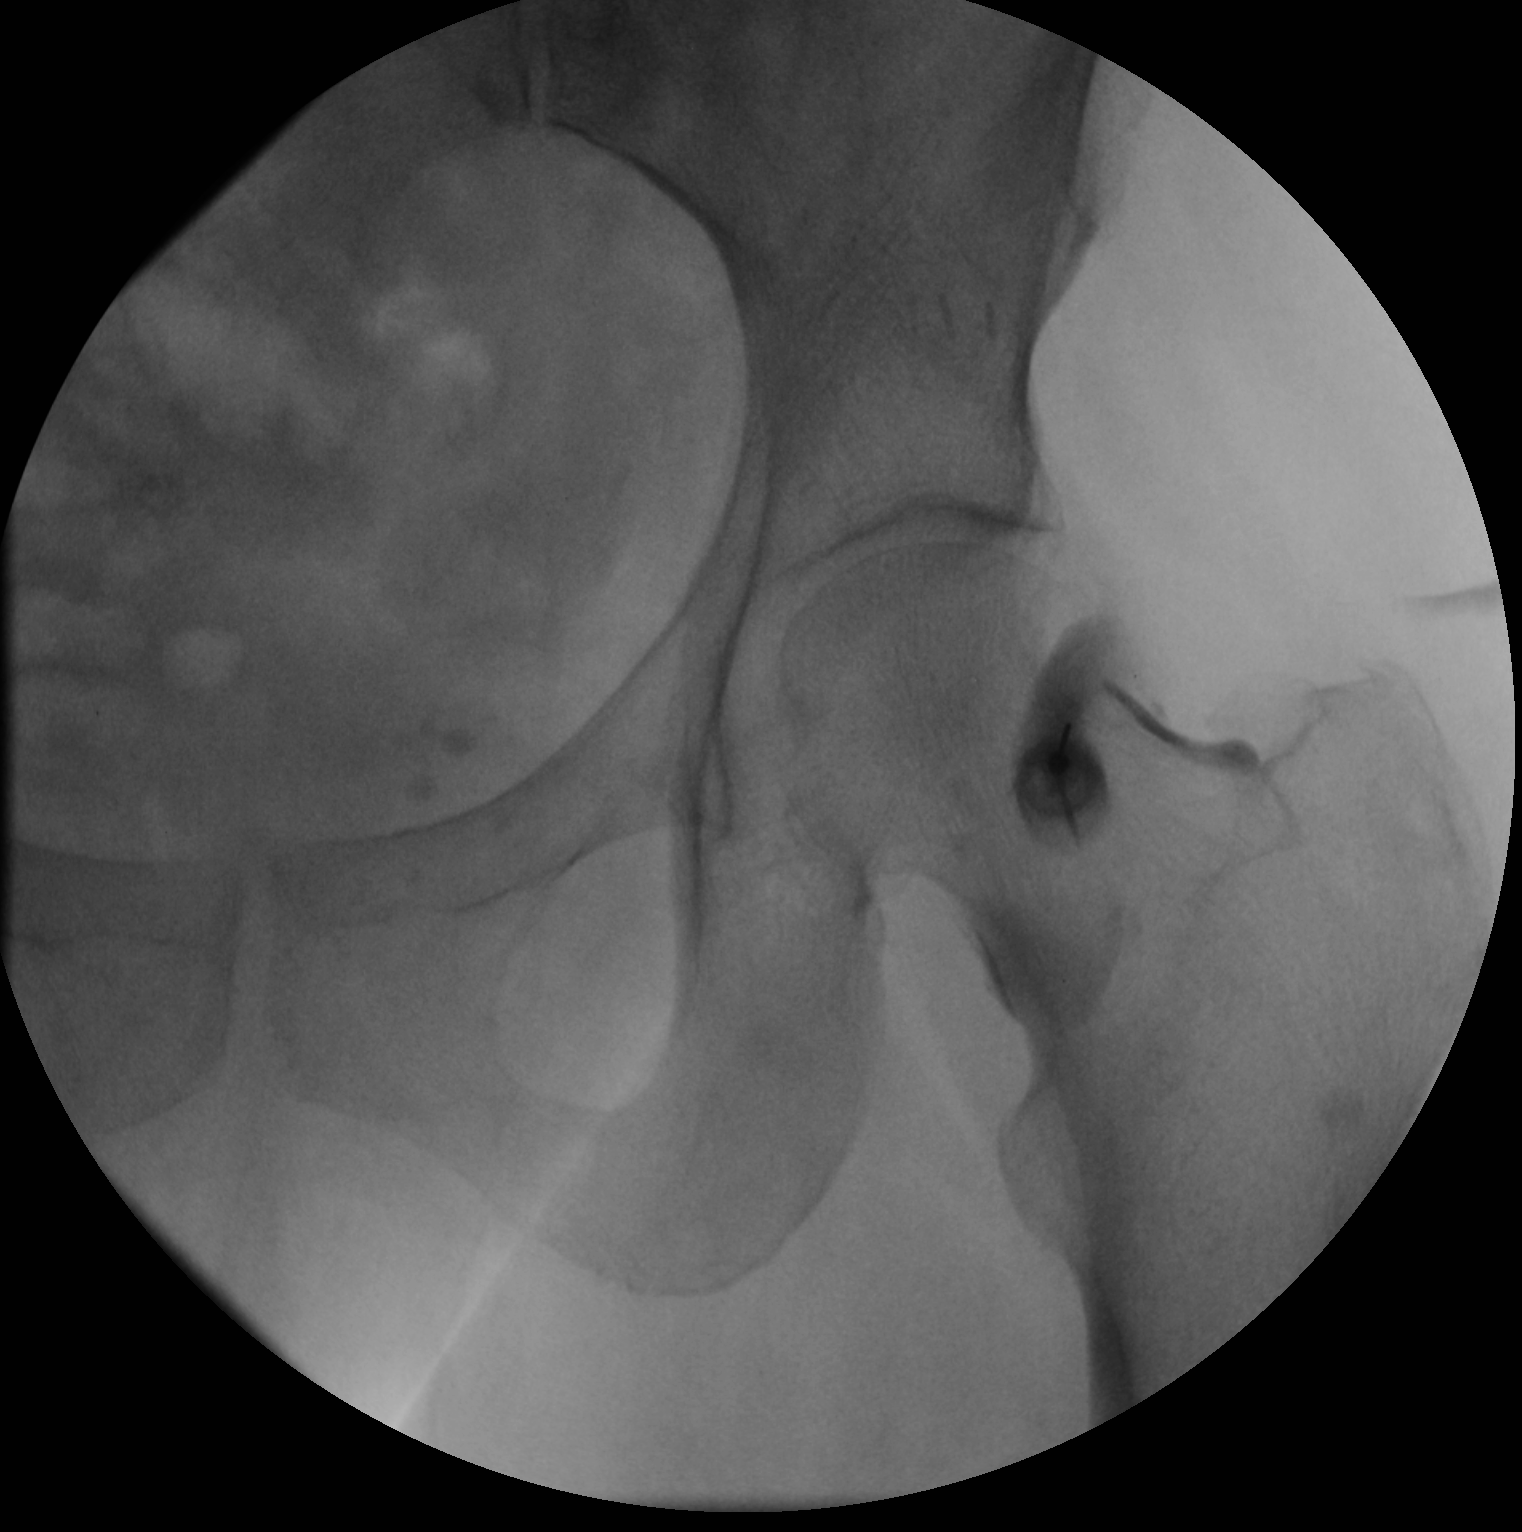 A small amount of iodinated contrast is injected into the femoroacetabular joint to ensure appropriate needle entry into the joint space.